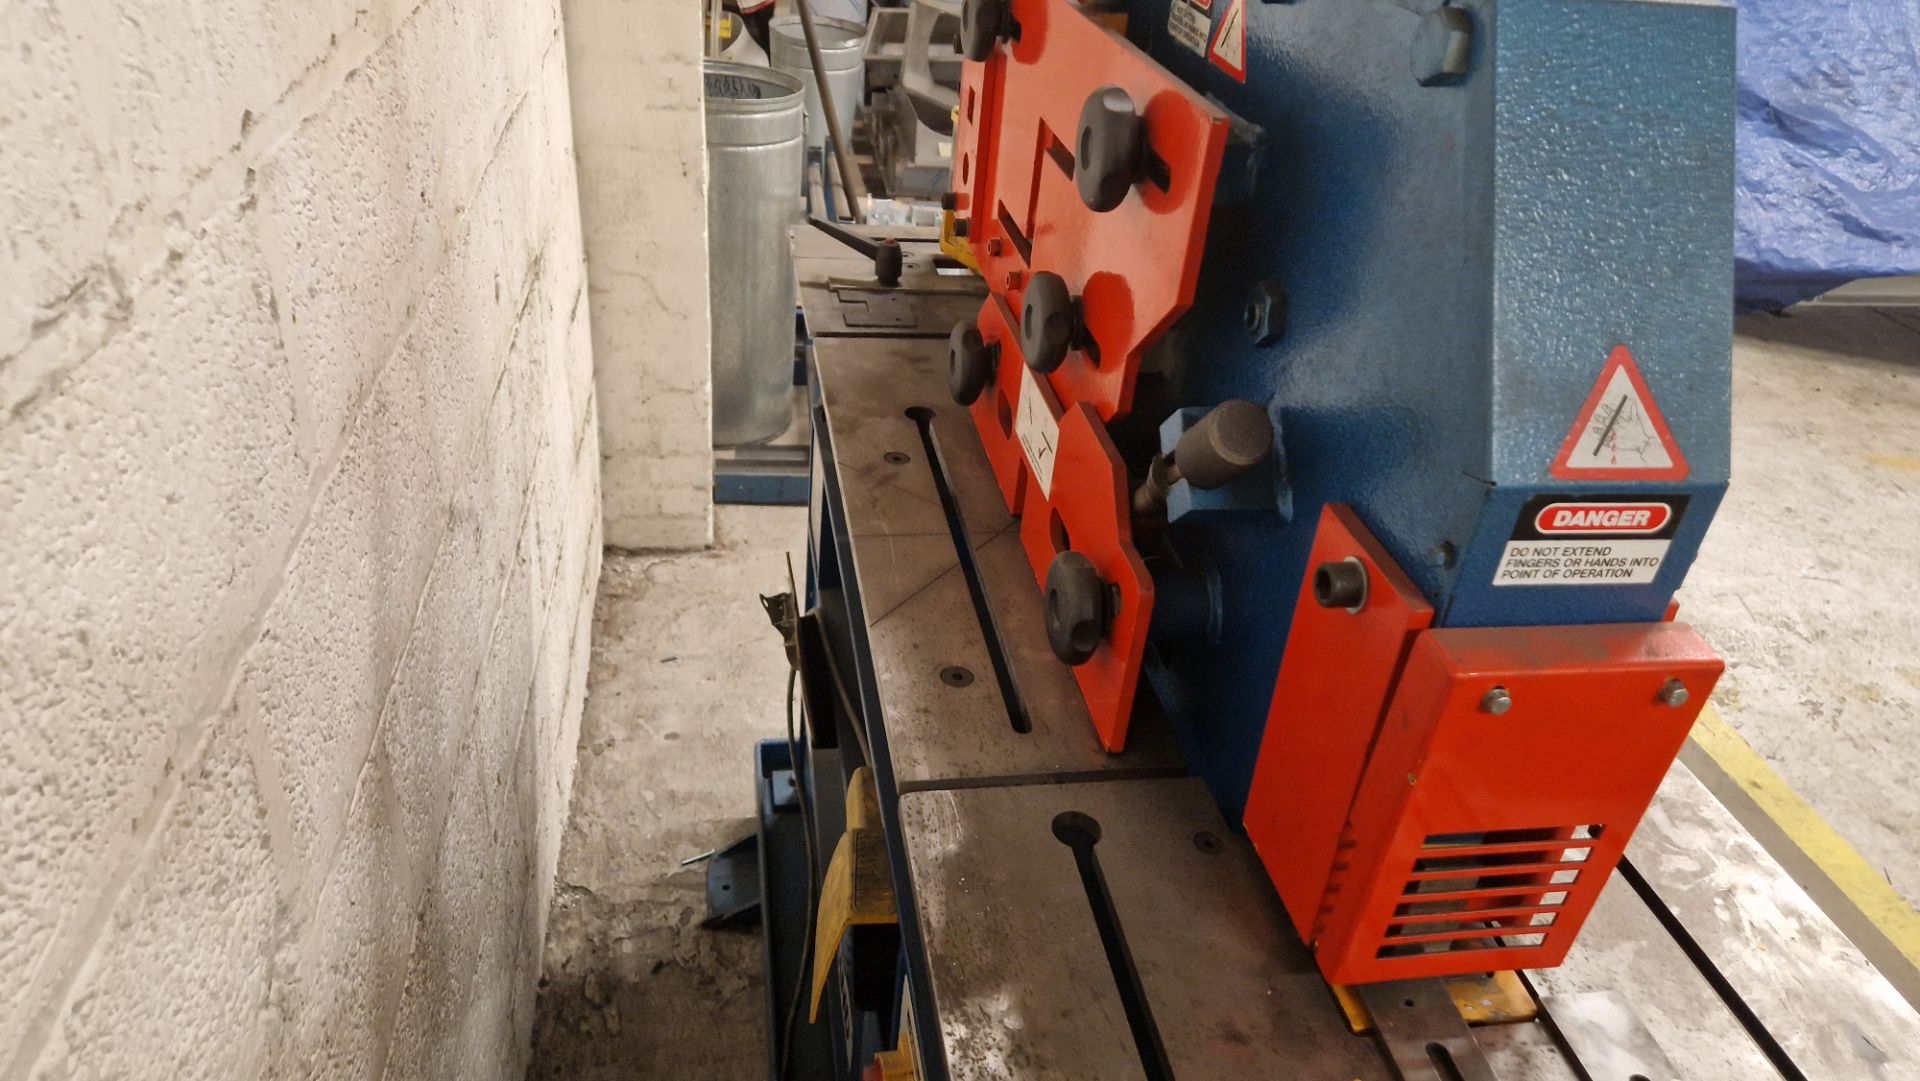 KINGSLAND COMPACT 45 HYDRAULIC METAL WORKER, *** ASSETS ARE LOCATED IN NEWCASTLE-UNDER-LYME*** - Bild 3 aus 4